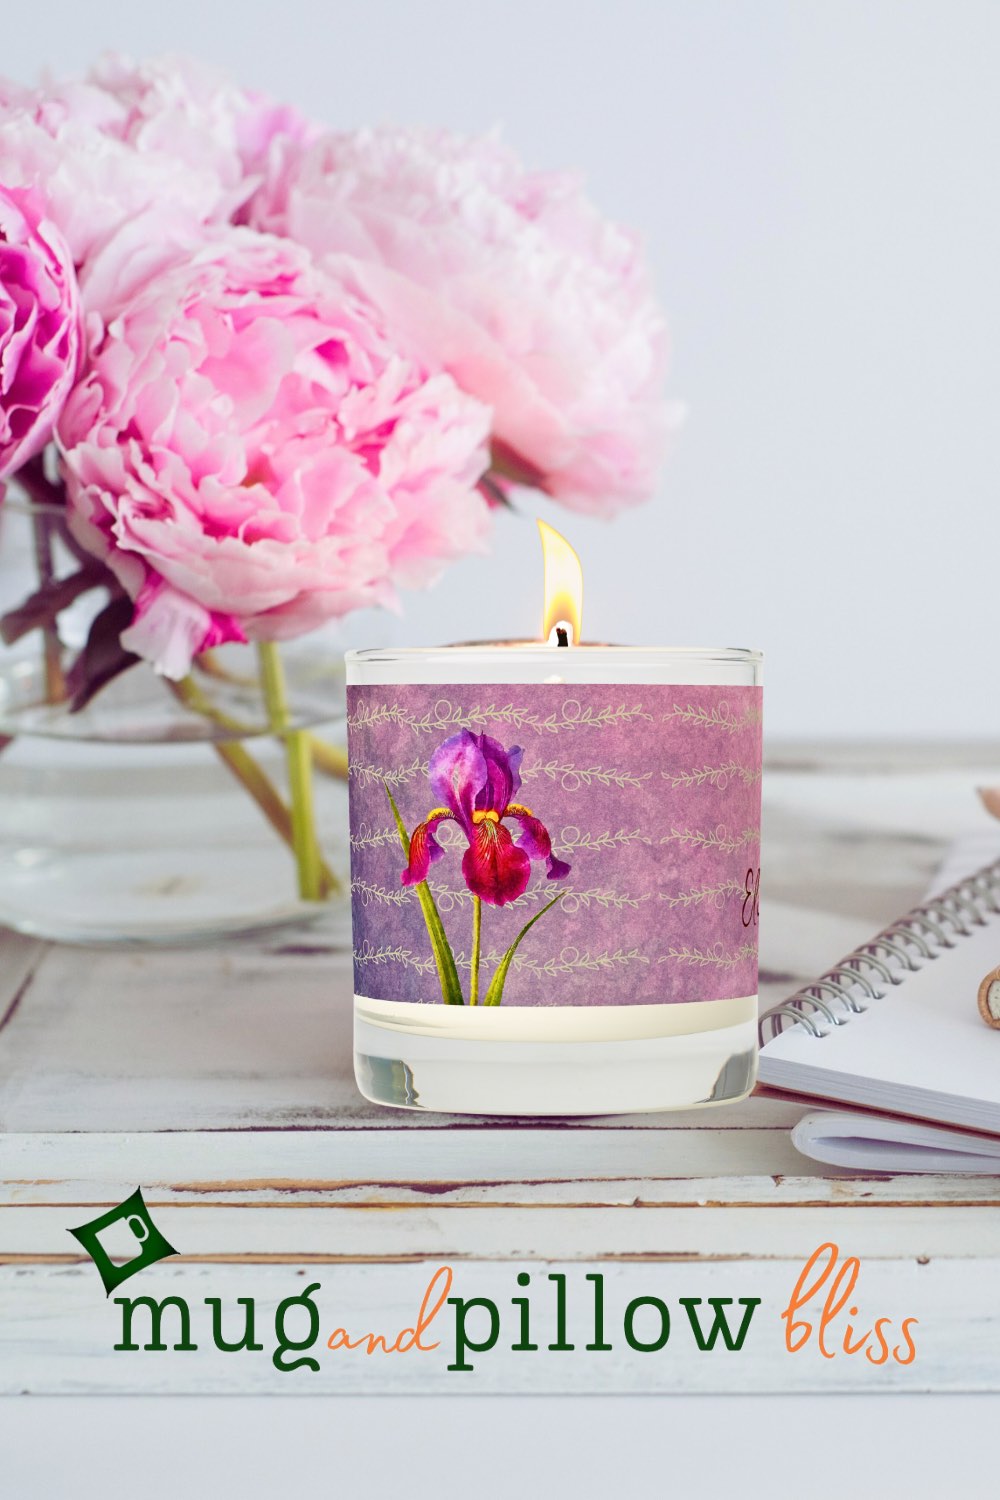 A scented candle with soft purple floral hues adding a touch of tranquility and relaxation to the snug room ambiance.